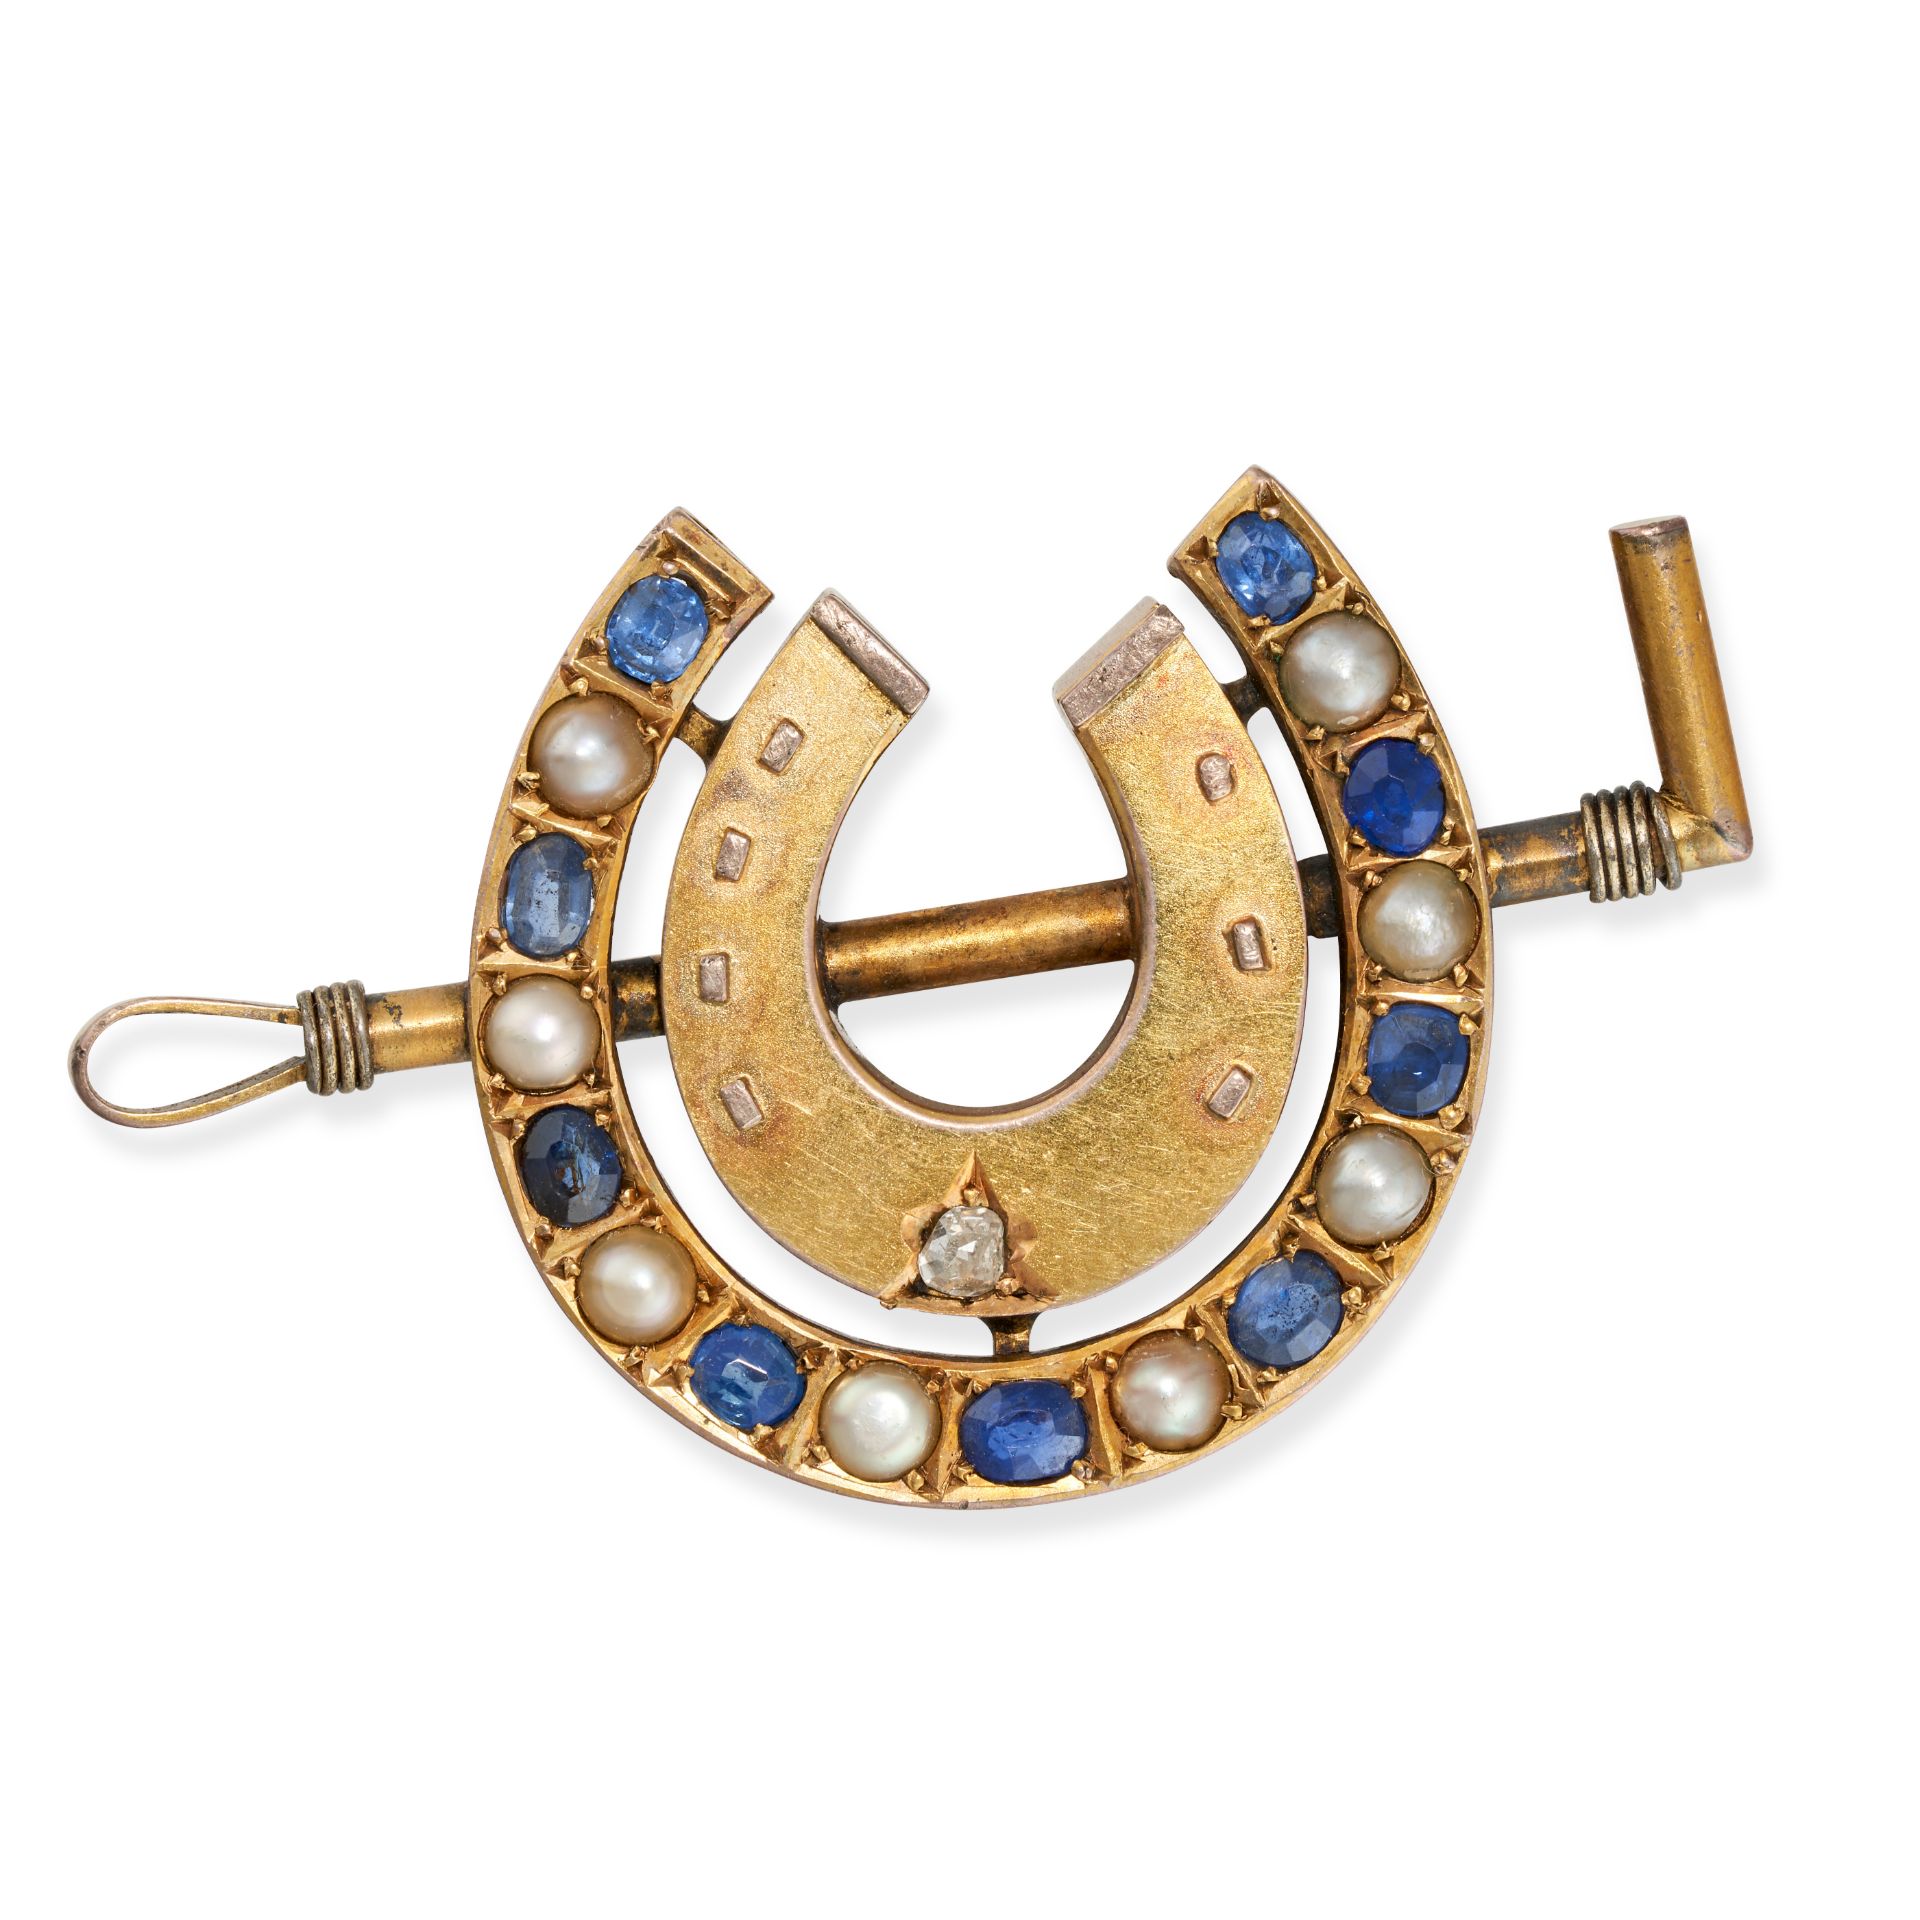 AN ANTIQUE SAPPHIRE, PEARL AND DIAMOND HORSESHOE AND RIDING CROP BROOCH designed as a horseshoe s...